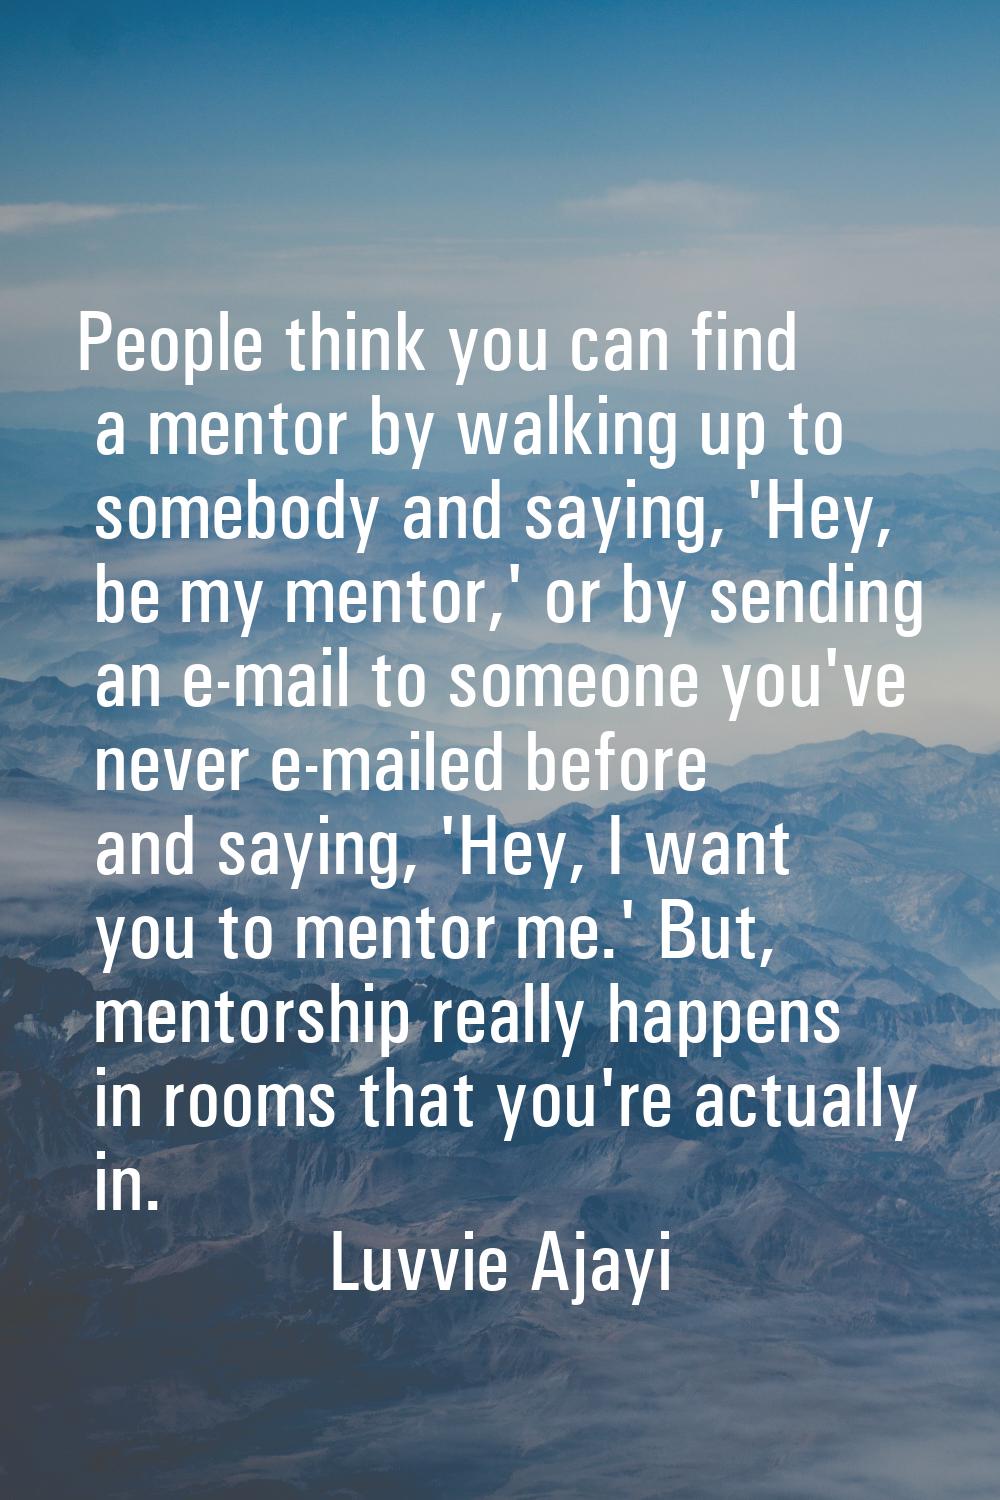 People think you can find a mentor by walking up to somebody and saying, 'Hey, be my mentor,' or by